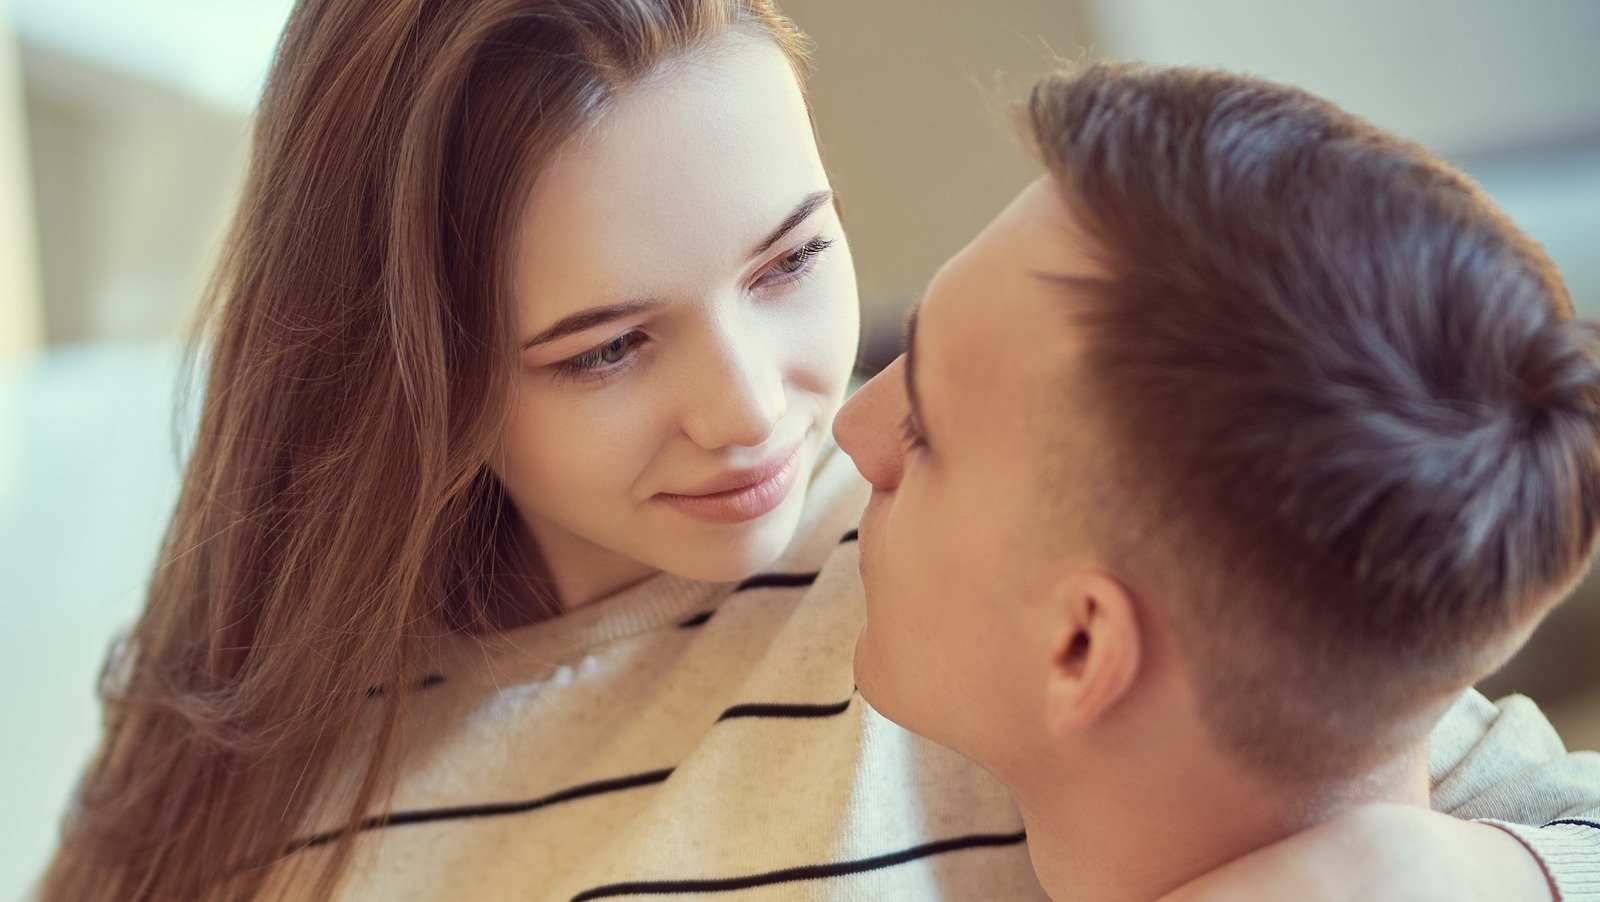 This Is What Happens To Your Eyes When You Fall In Love - Health Digest